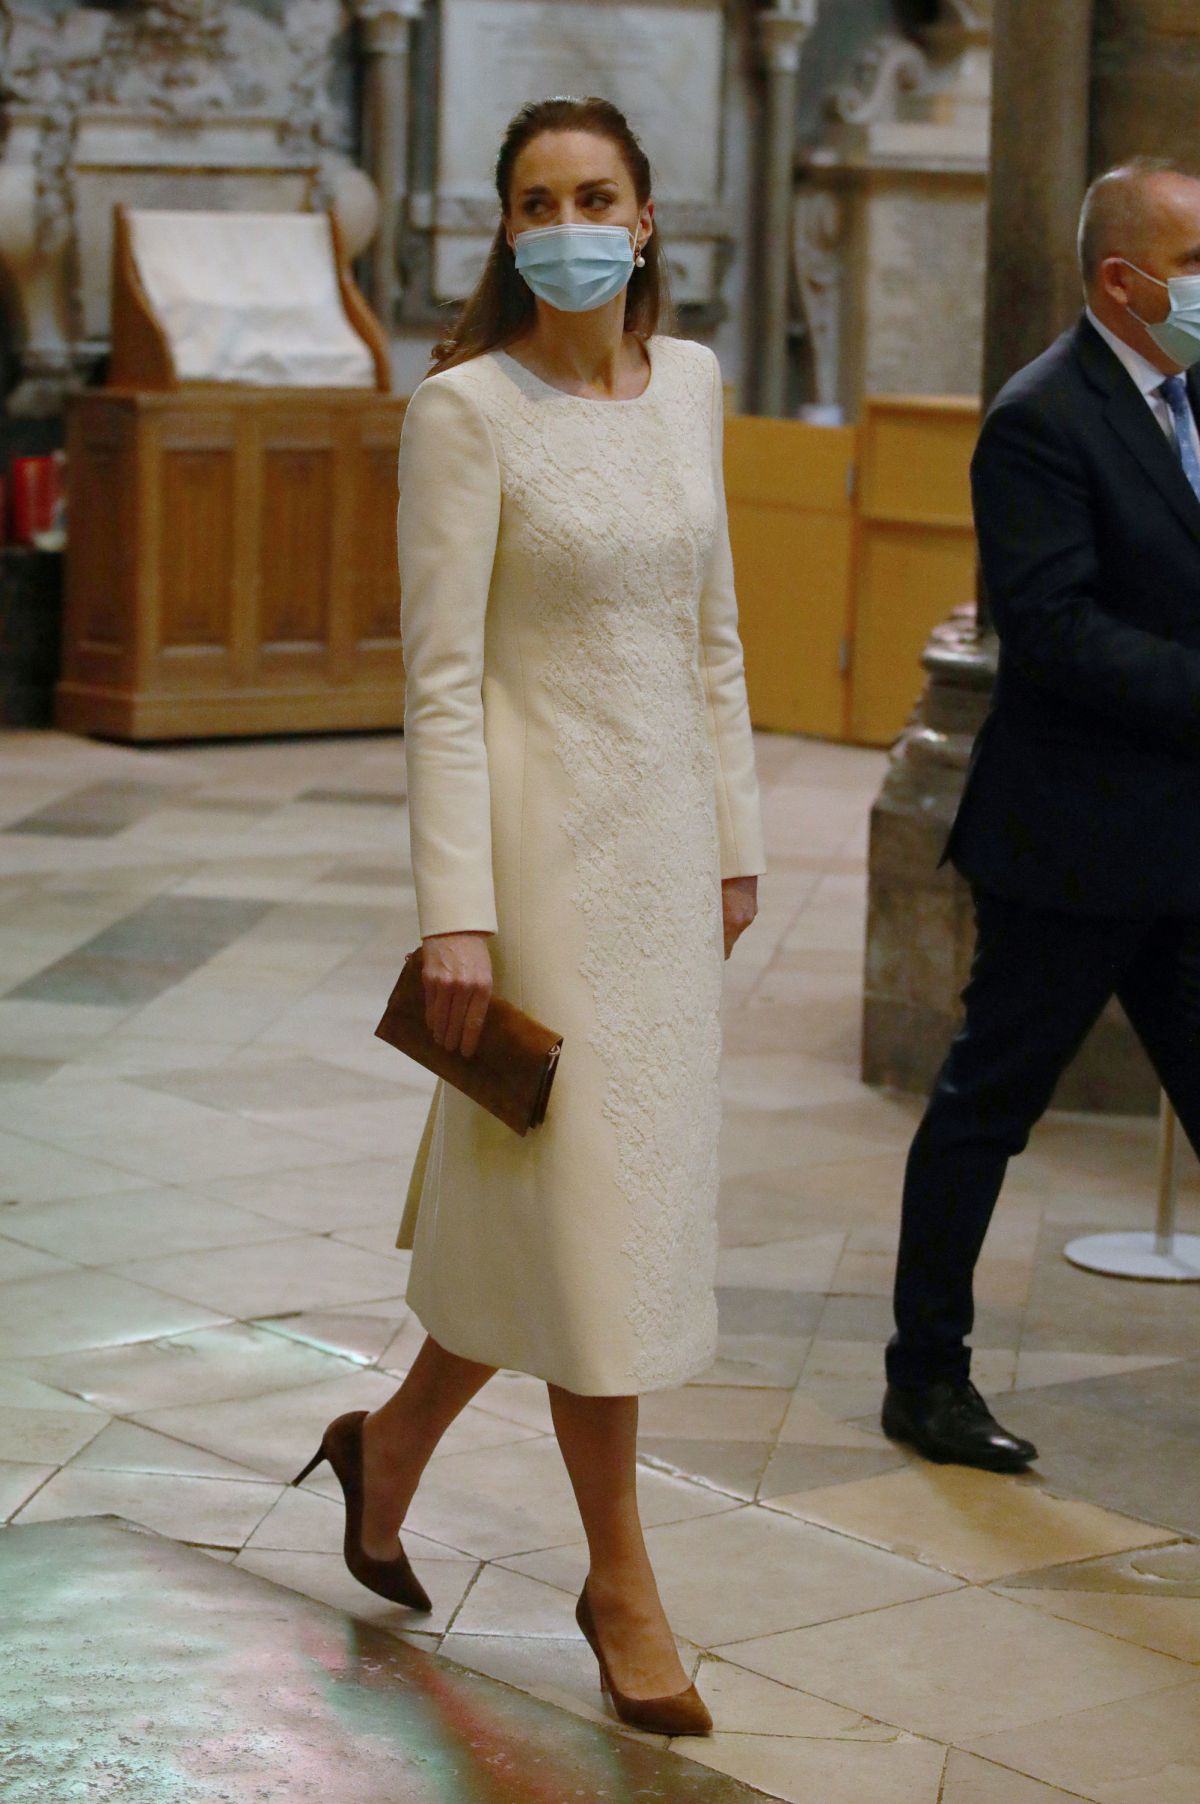 kate-middleton-at-coronavirus-disease-vaccination-centre-at-westminster-abbey-03-23-2021